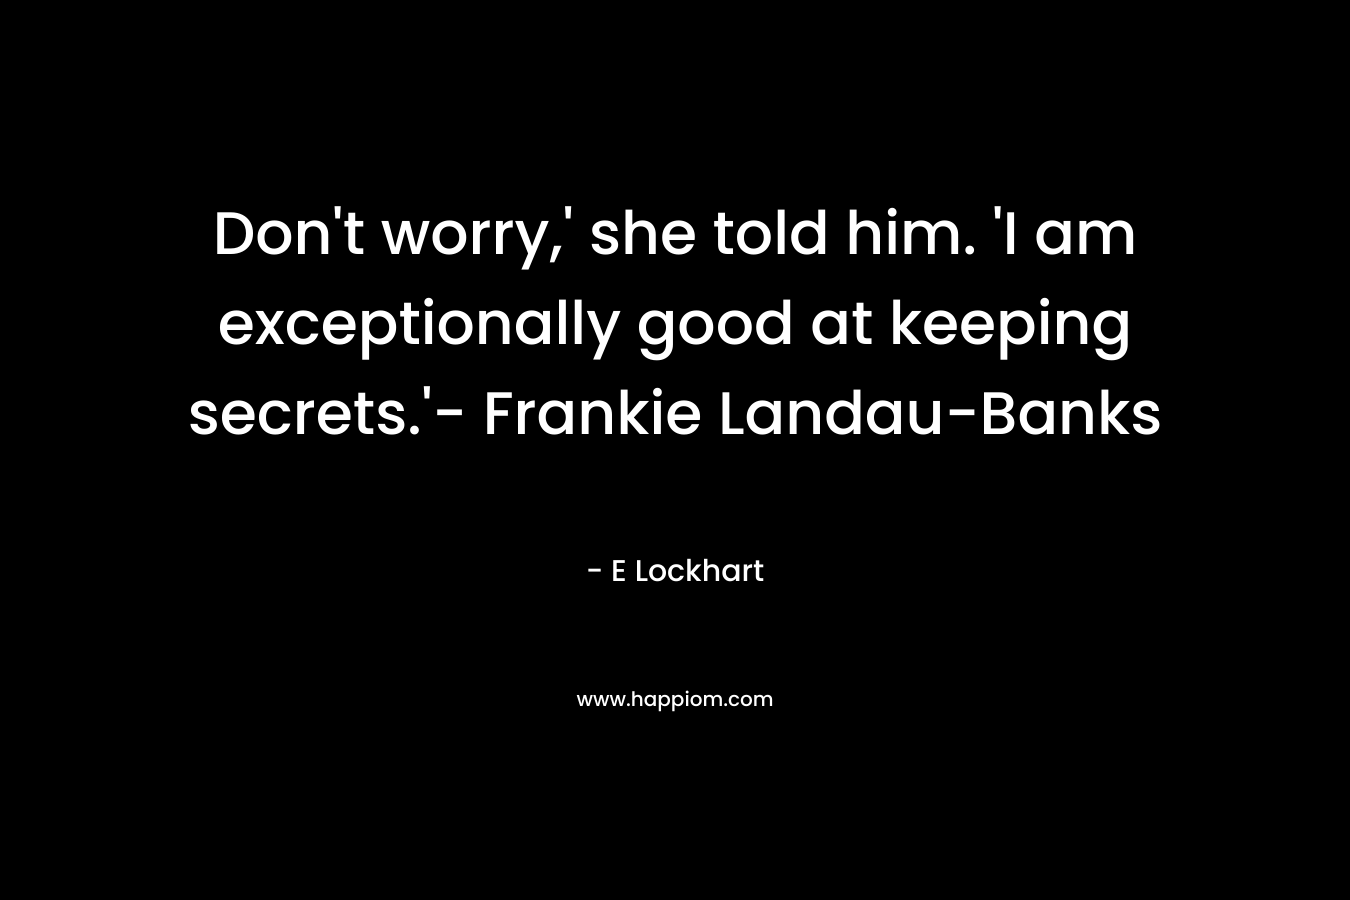 Don't worry,' she told him. 'I am exceptionally good at keeping secrets.'- Frankie Landau-Banks